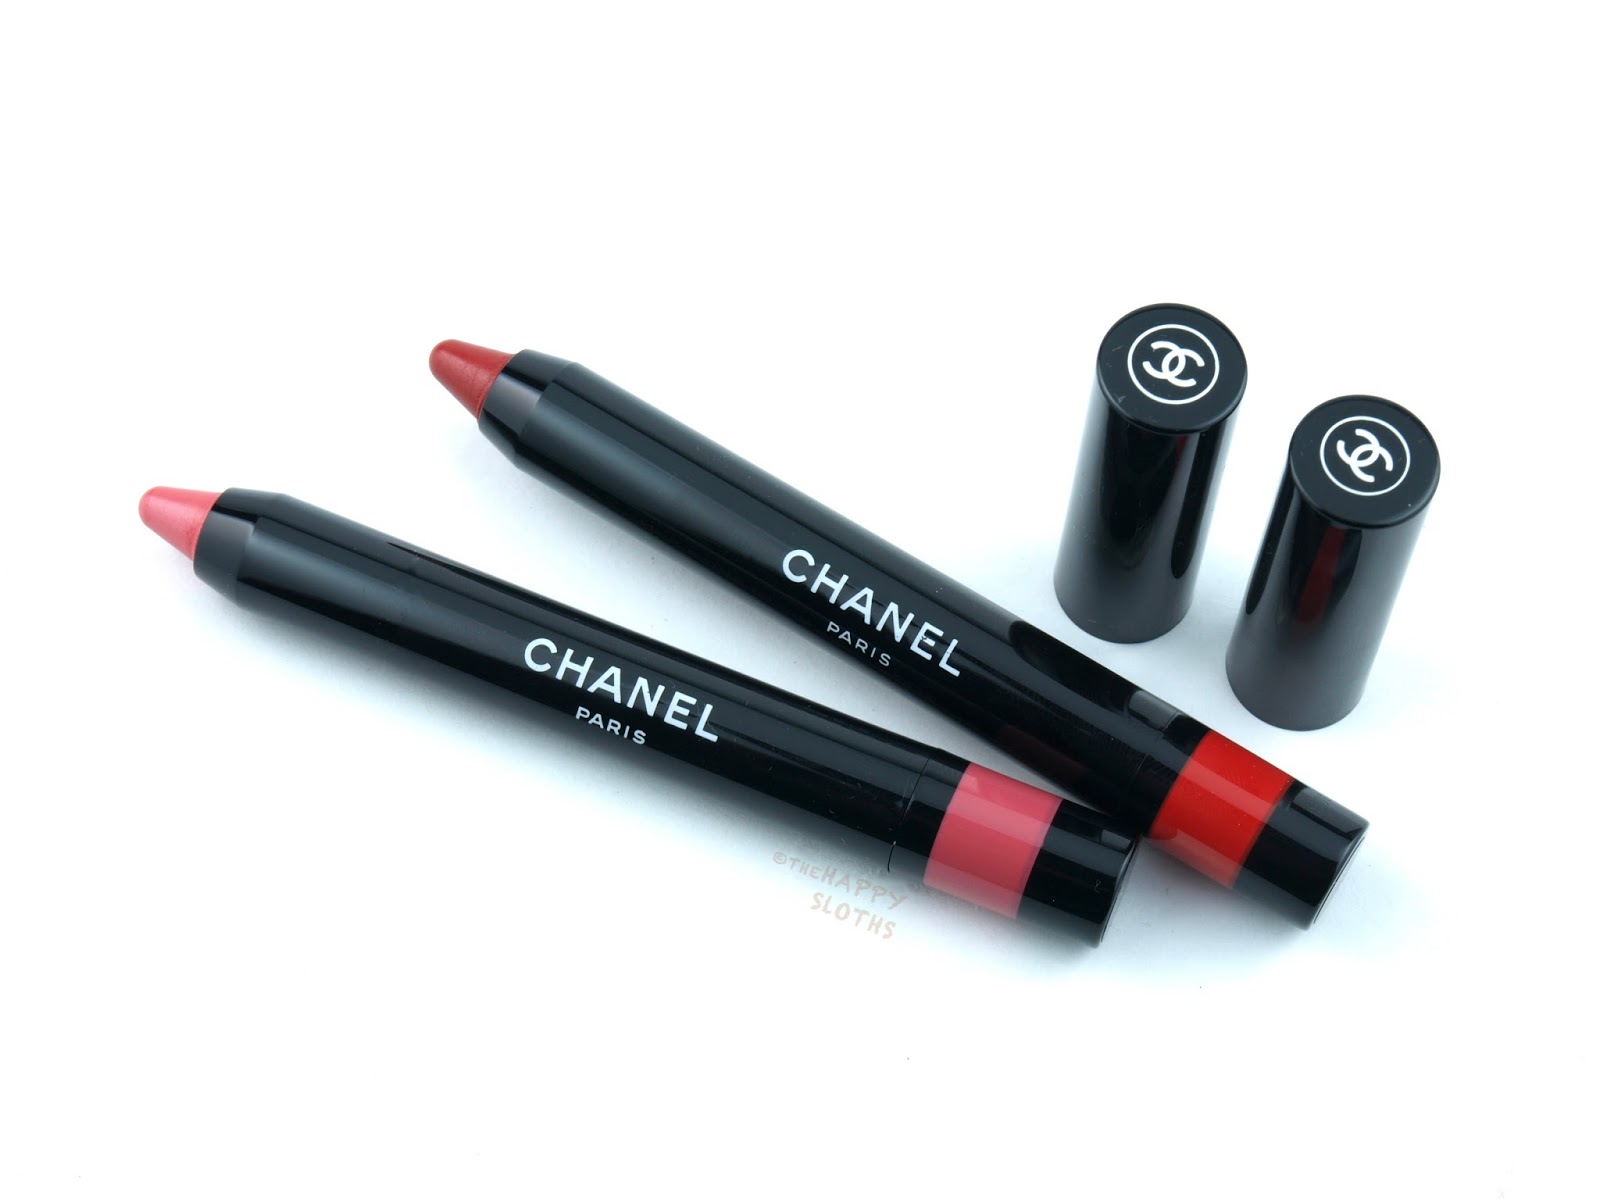 Chanel Le Rouge Crayon de Couleur: Review and Swatches  The Happy Sloths:  Beauty, Makeup, and Skincare Blog with Reviews and Swatches